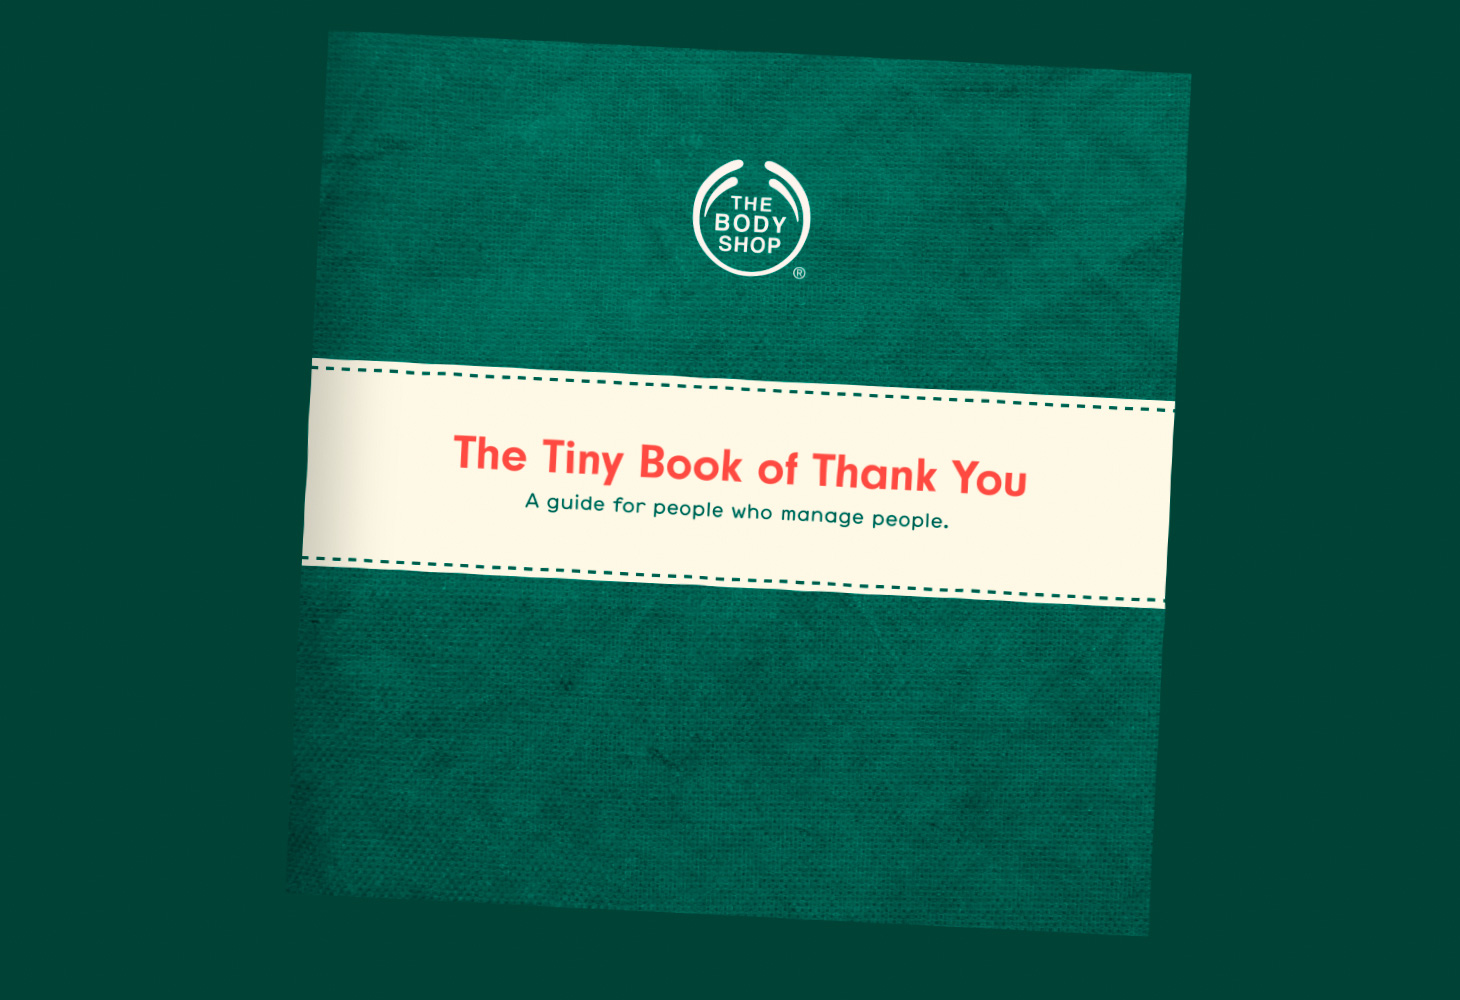 The Body Shop - The Tiny Book of Thank You - Front cover